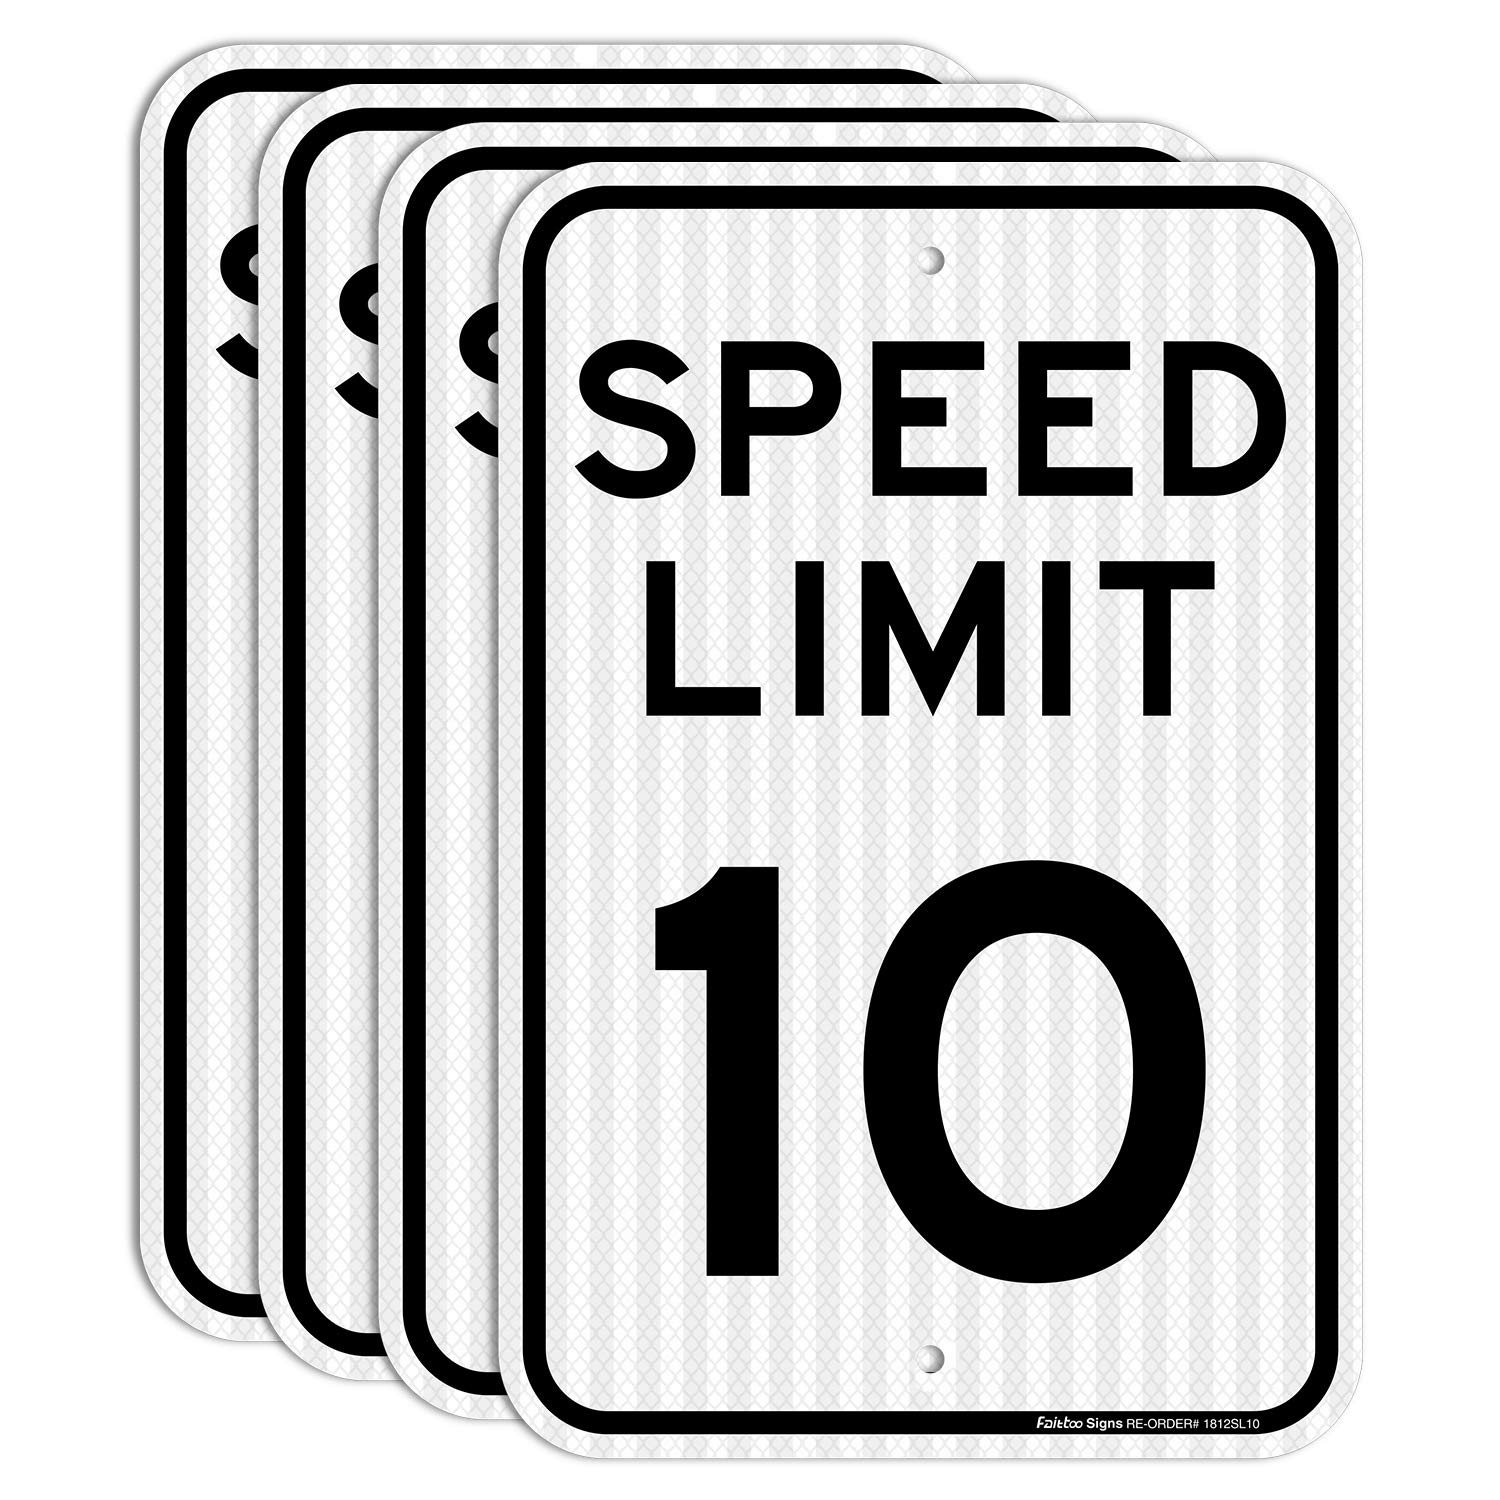 (4 Pack) Speed Limit 10 MPH Sign, Slow Down Sign, Traffic Signs,18 x 12 Inches Engineer Grade Reflective Sheeting, Rust Free Aluminum, Weather Resistant, Waterproof, Durable Ink, Easy to Mount